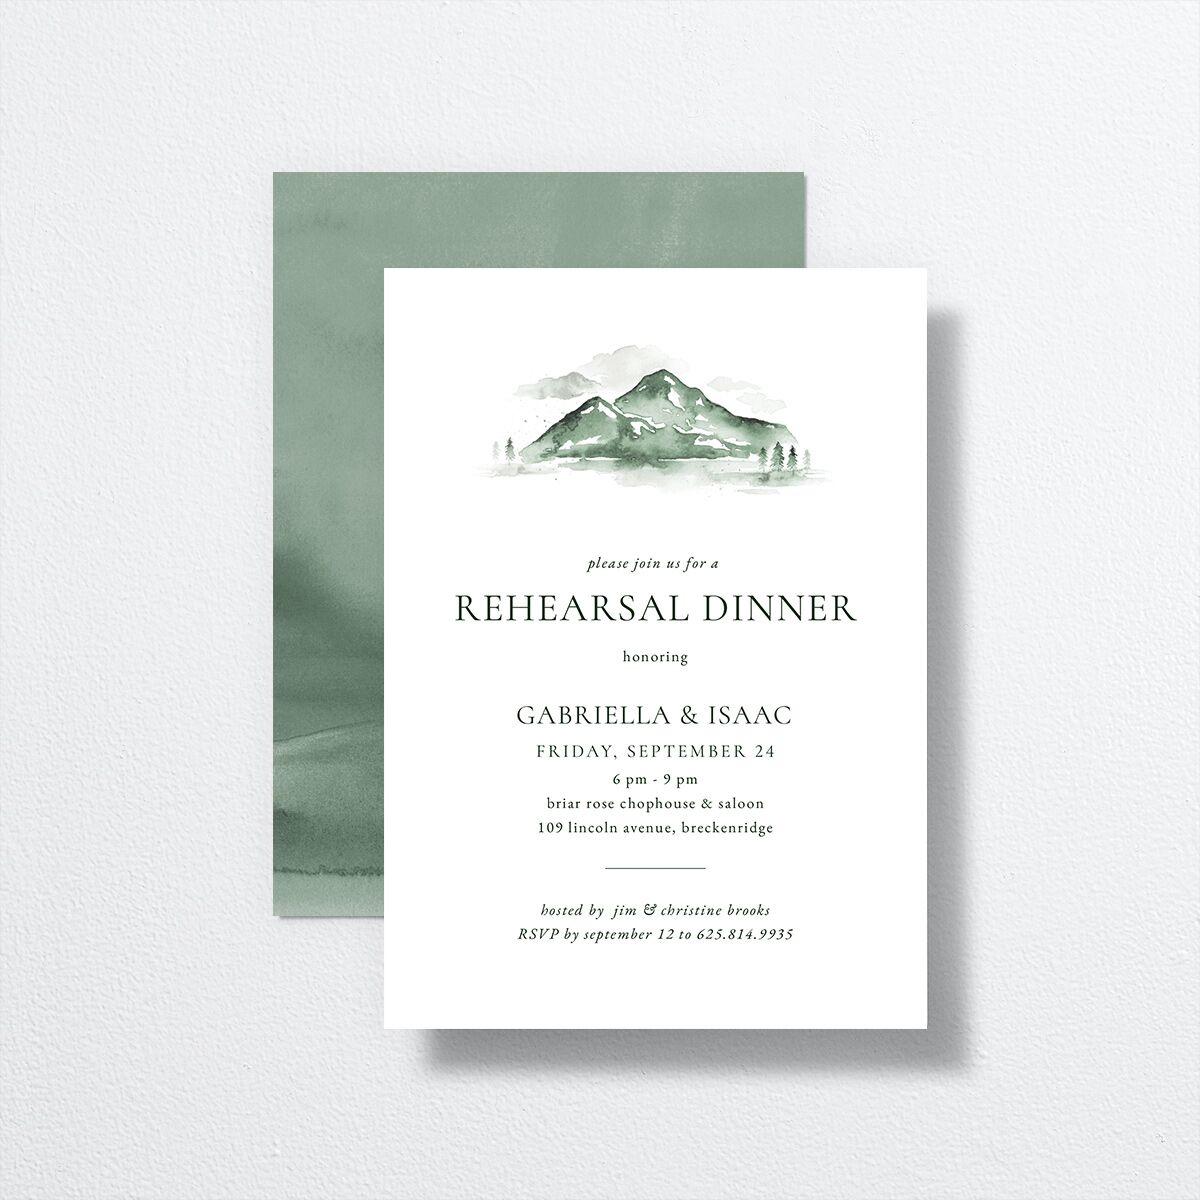 Watercolor Mountains Rehearsal Dinner Invitations front-and-back in green